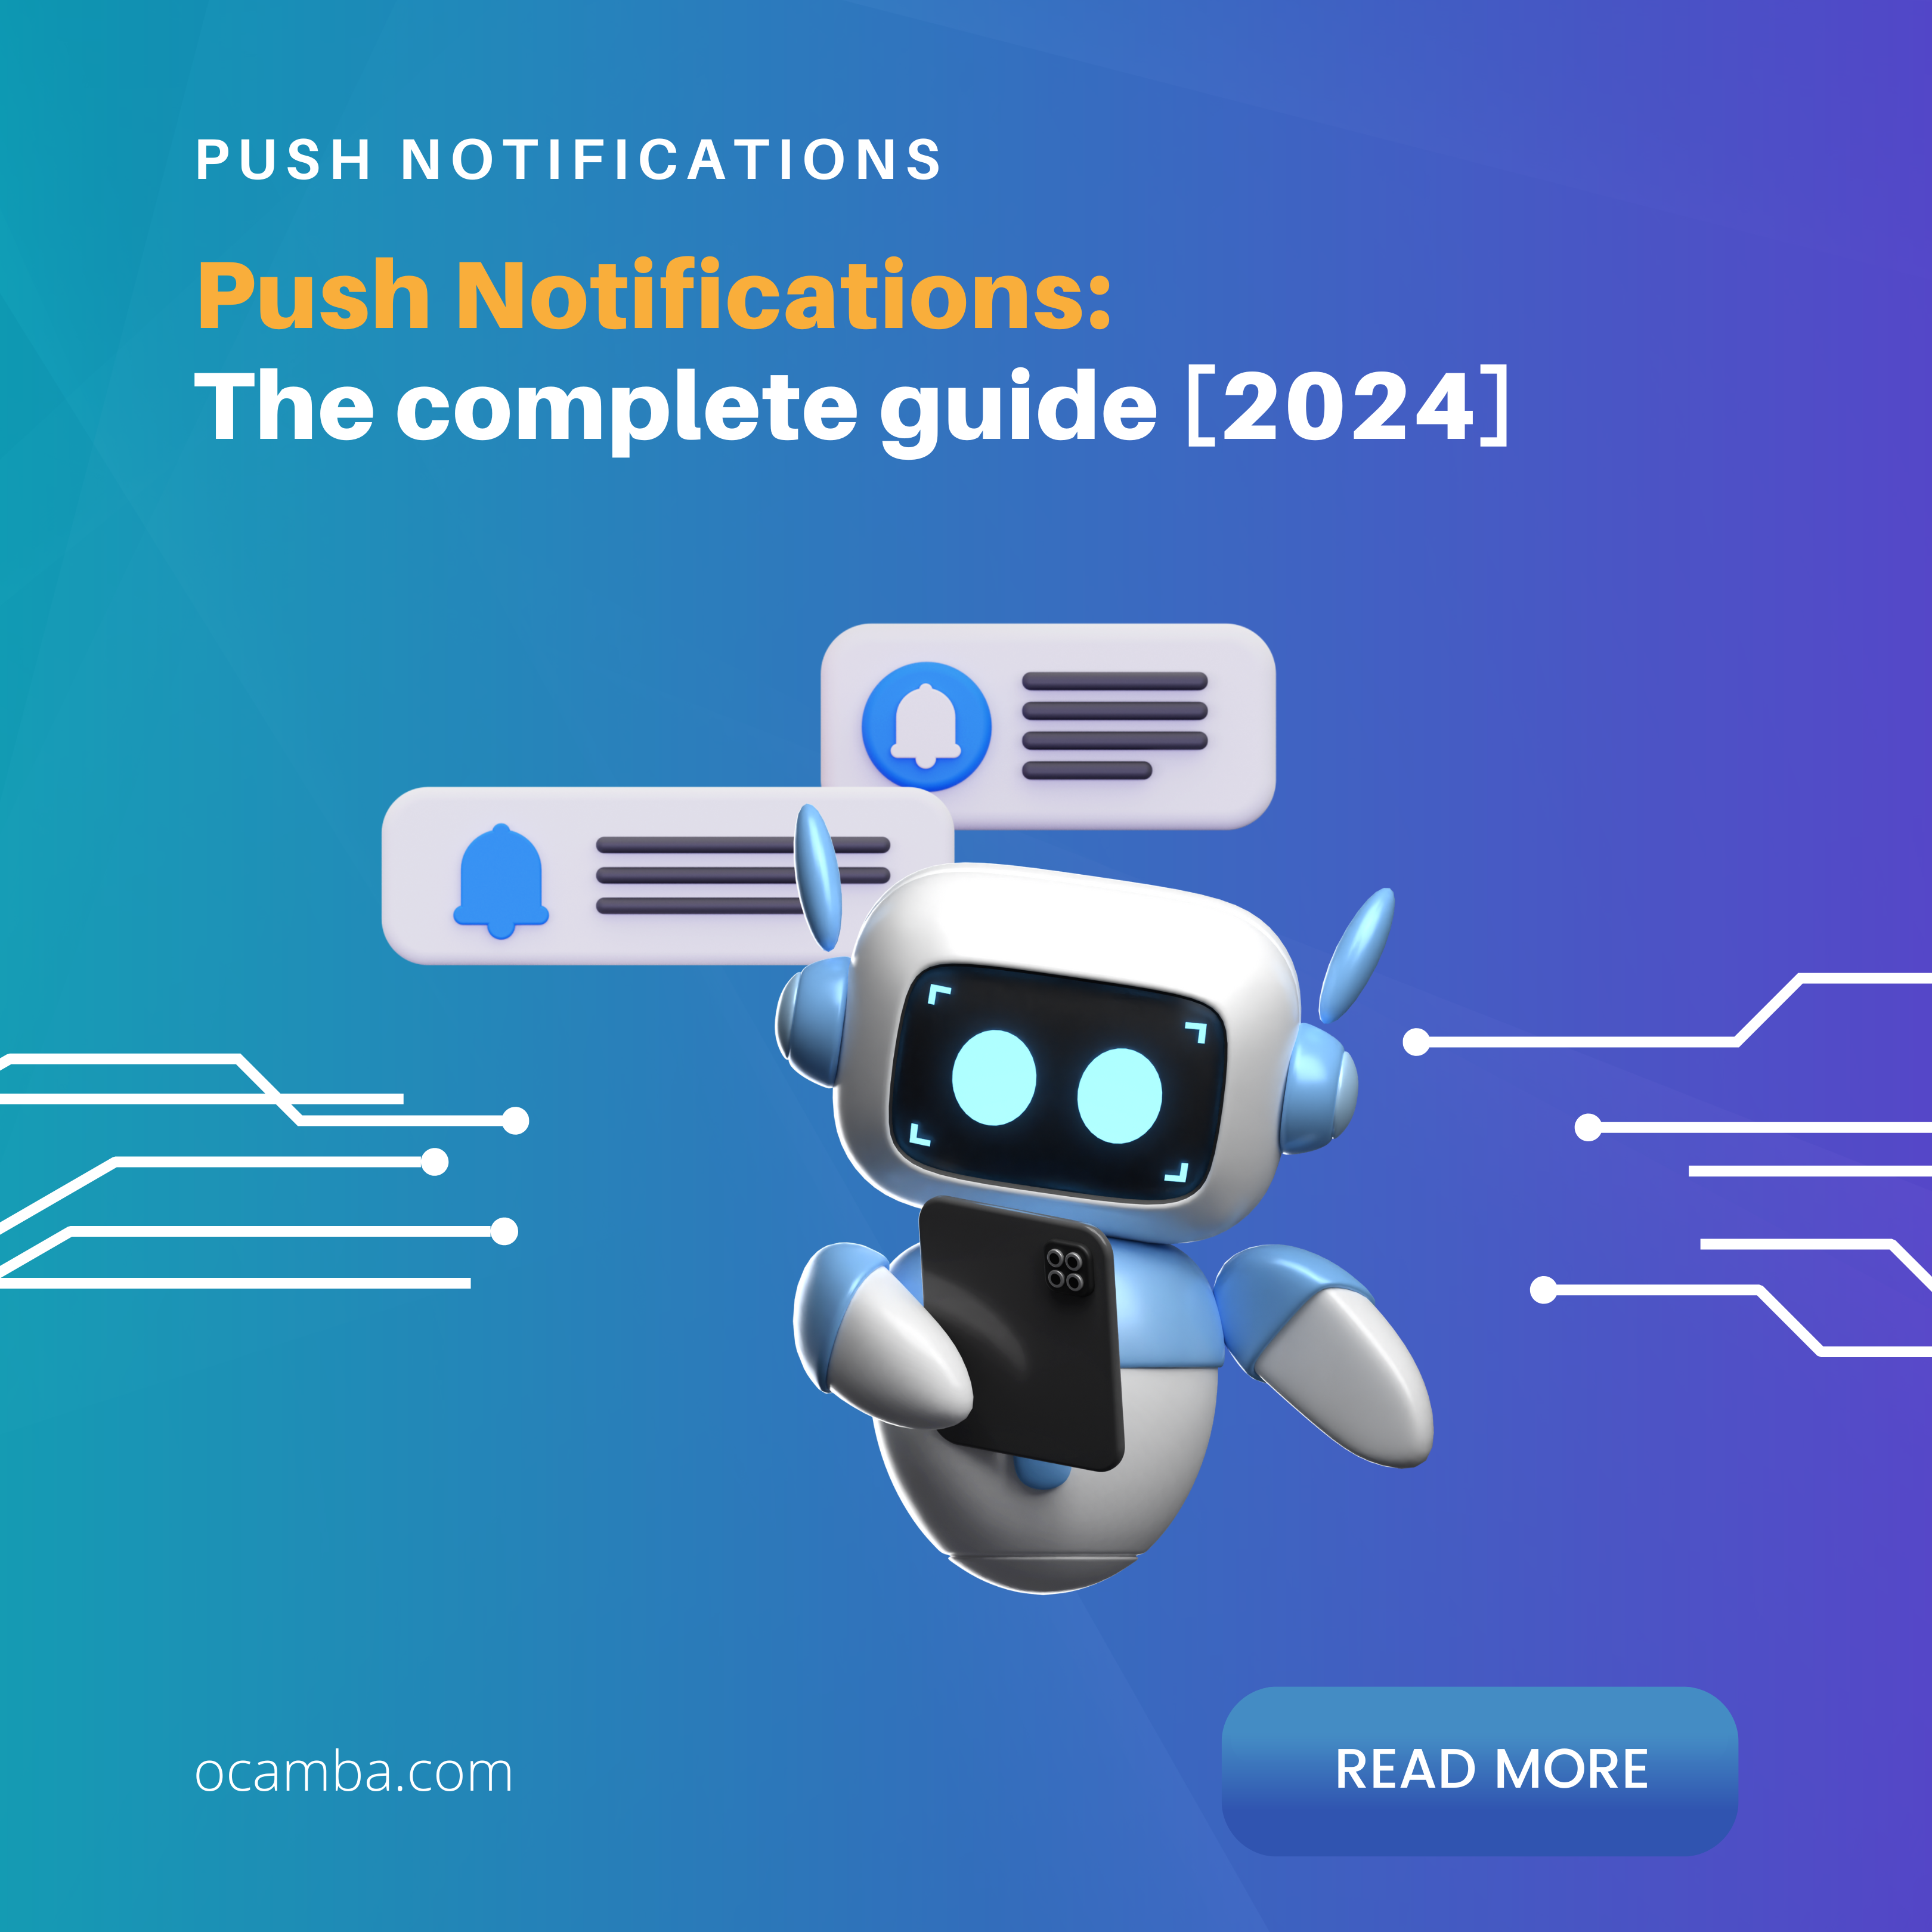  Push notifications: The complete guide [2024] 